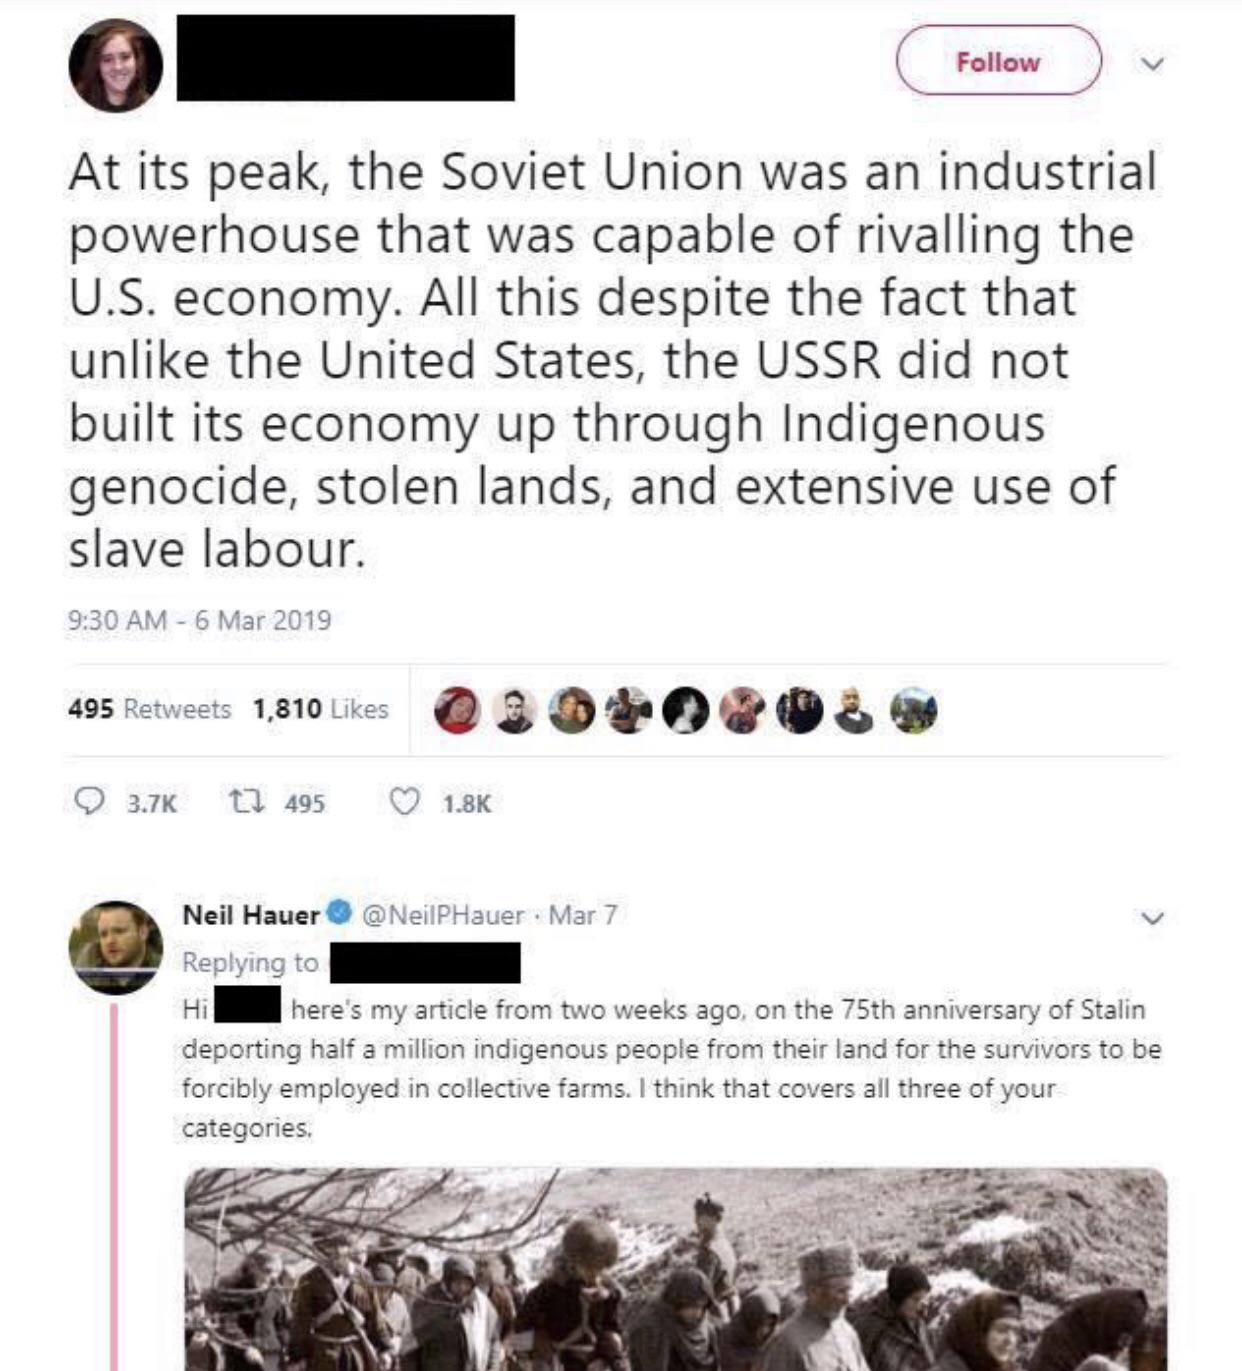 media - At its peak, the Soviet Union was an industrial powerhouse that was capable of rivalling the U.S. economy. All this despite the fact that un the United States, the Ussr did not built its economy up through Indigenous genocide, stolen lands, and ex